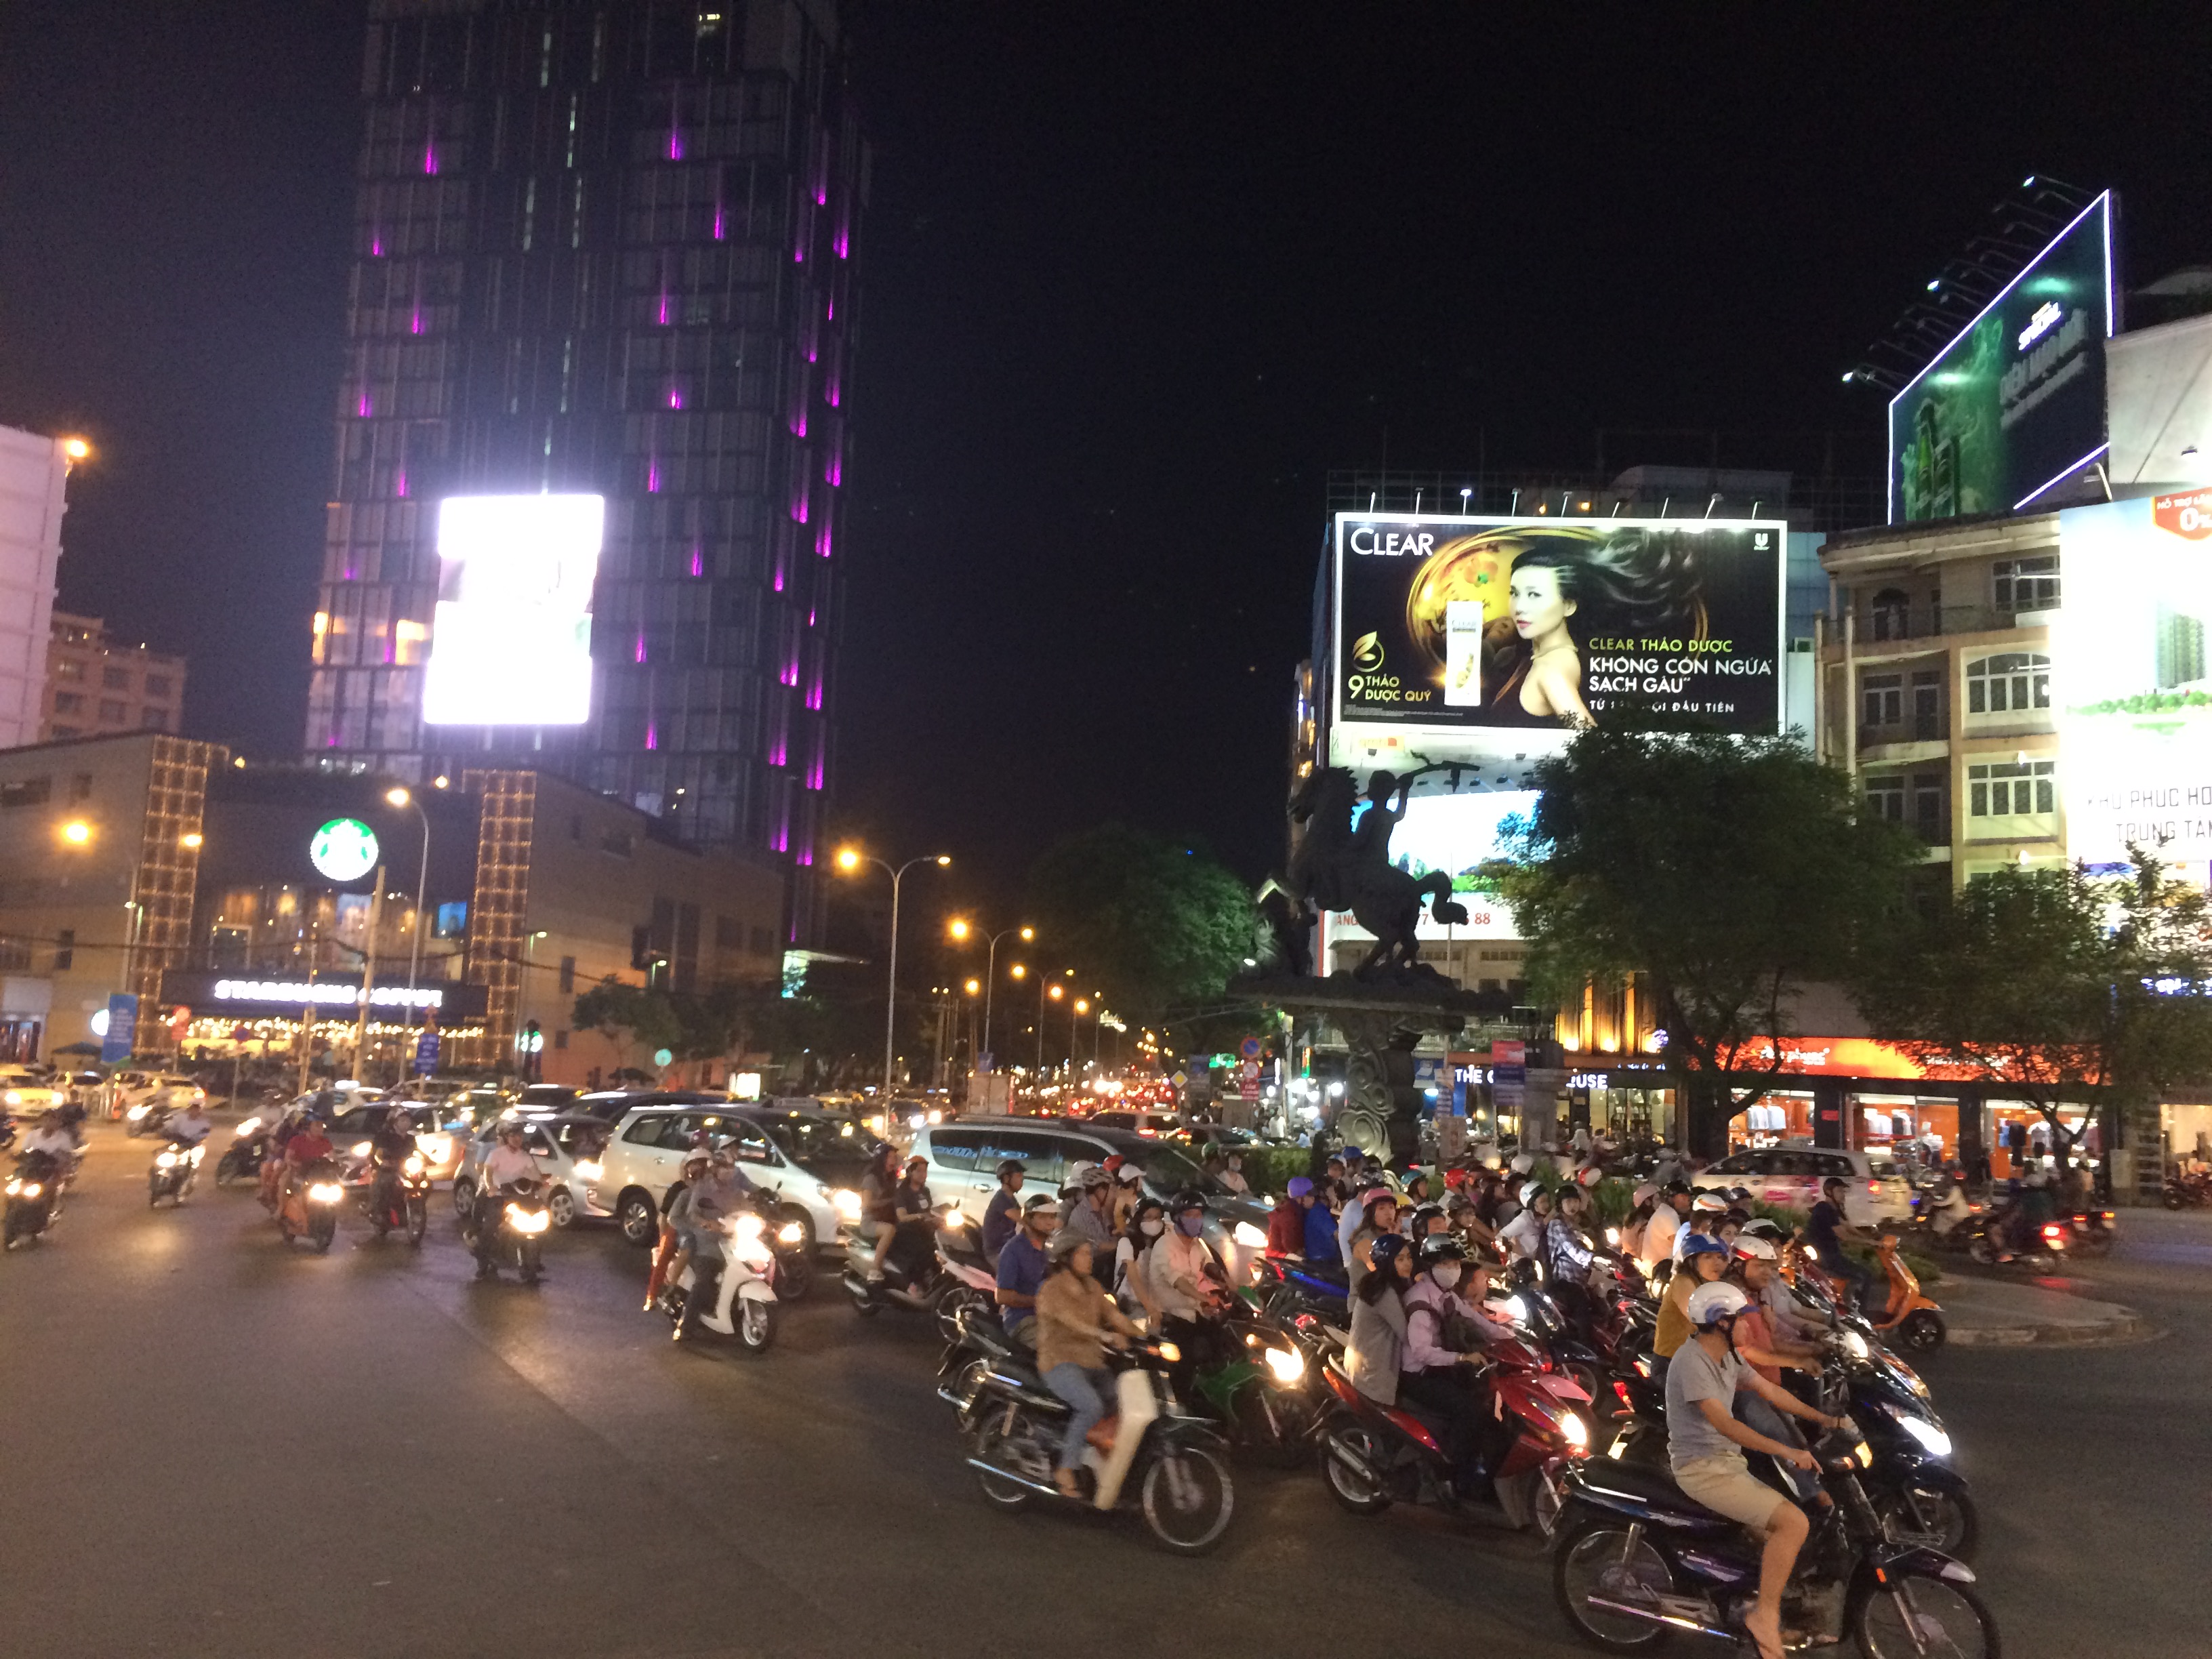 Ho Chi Minh city at night. The street is filled with motorbikes. 